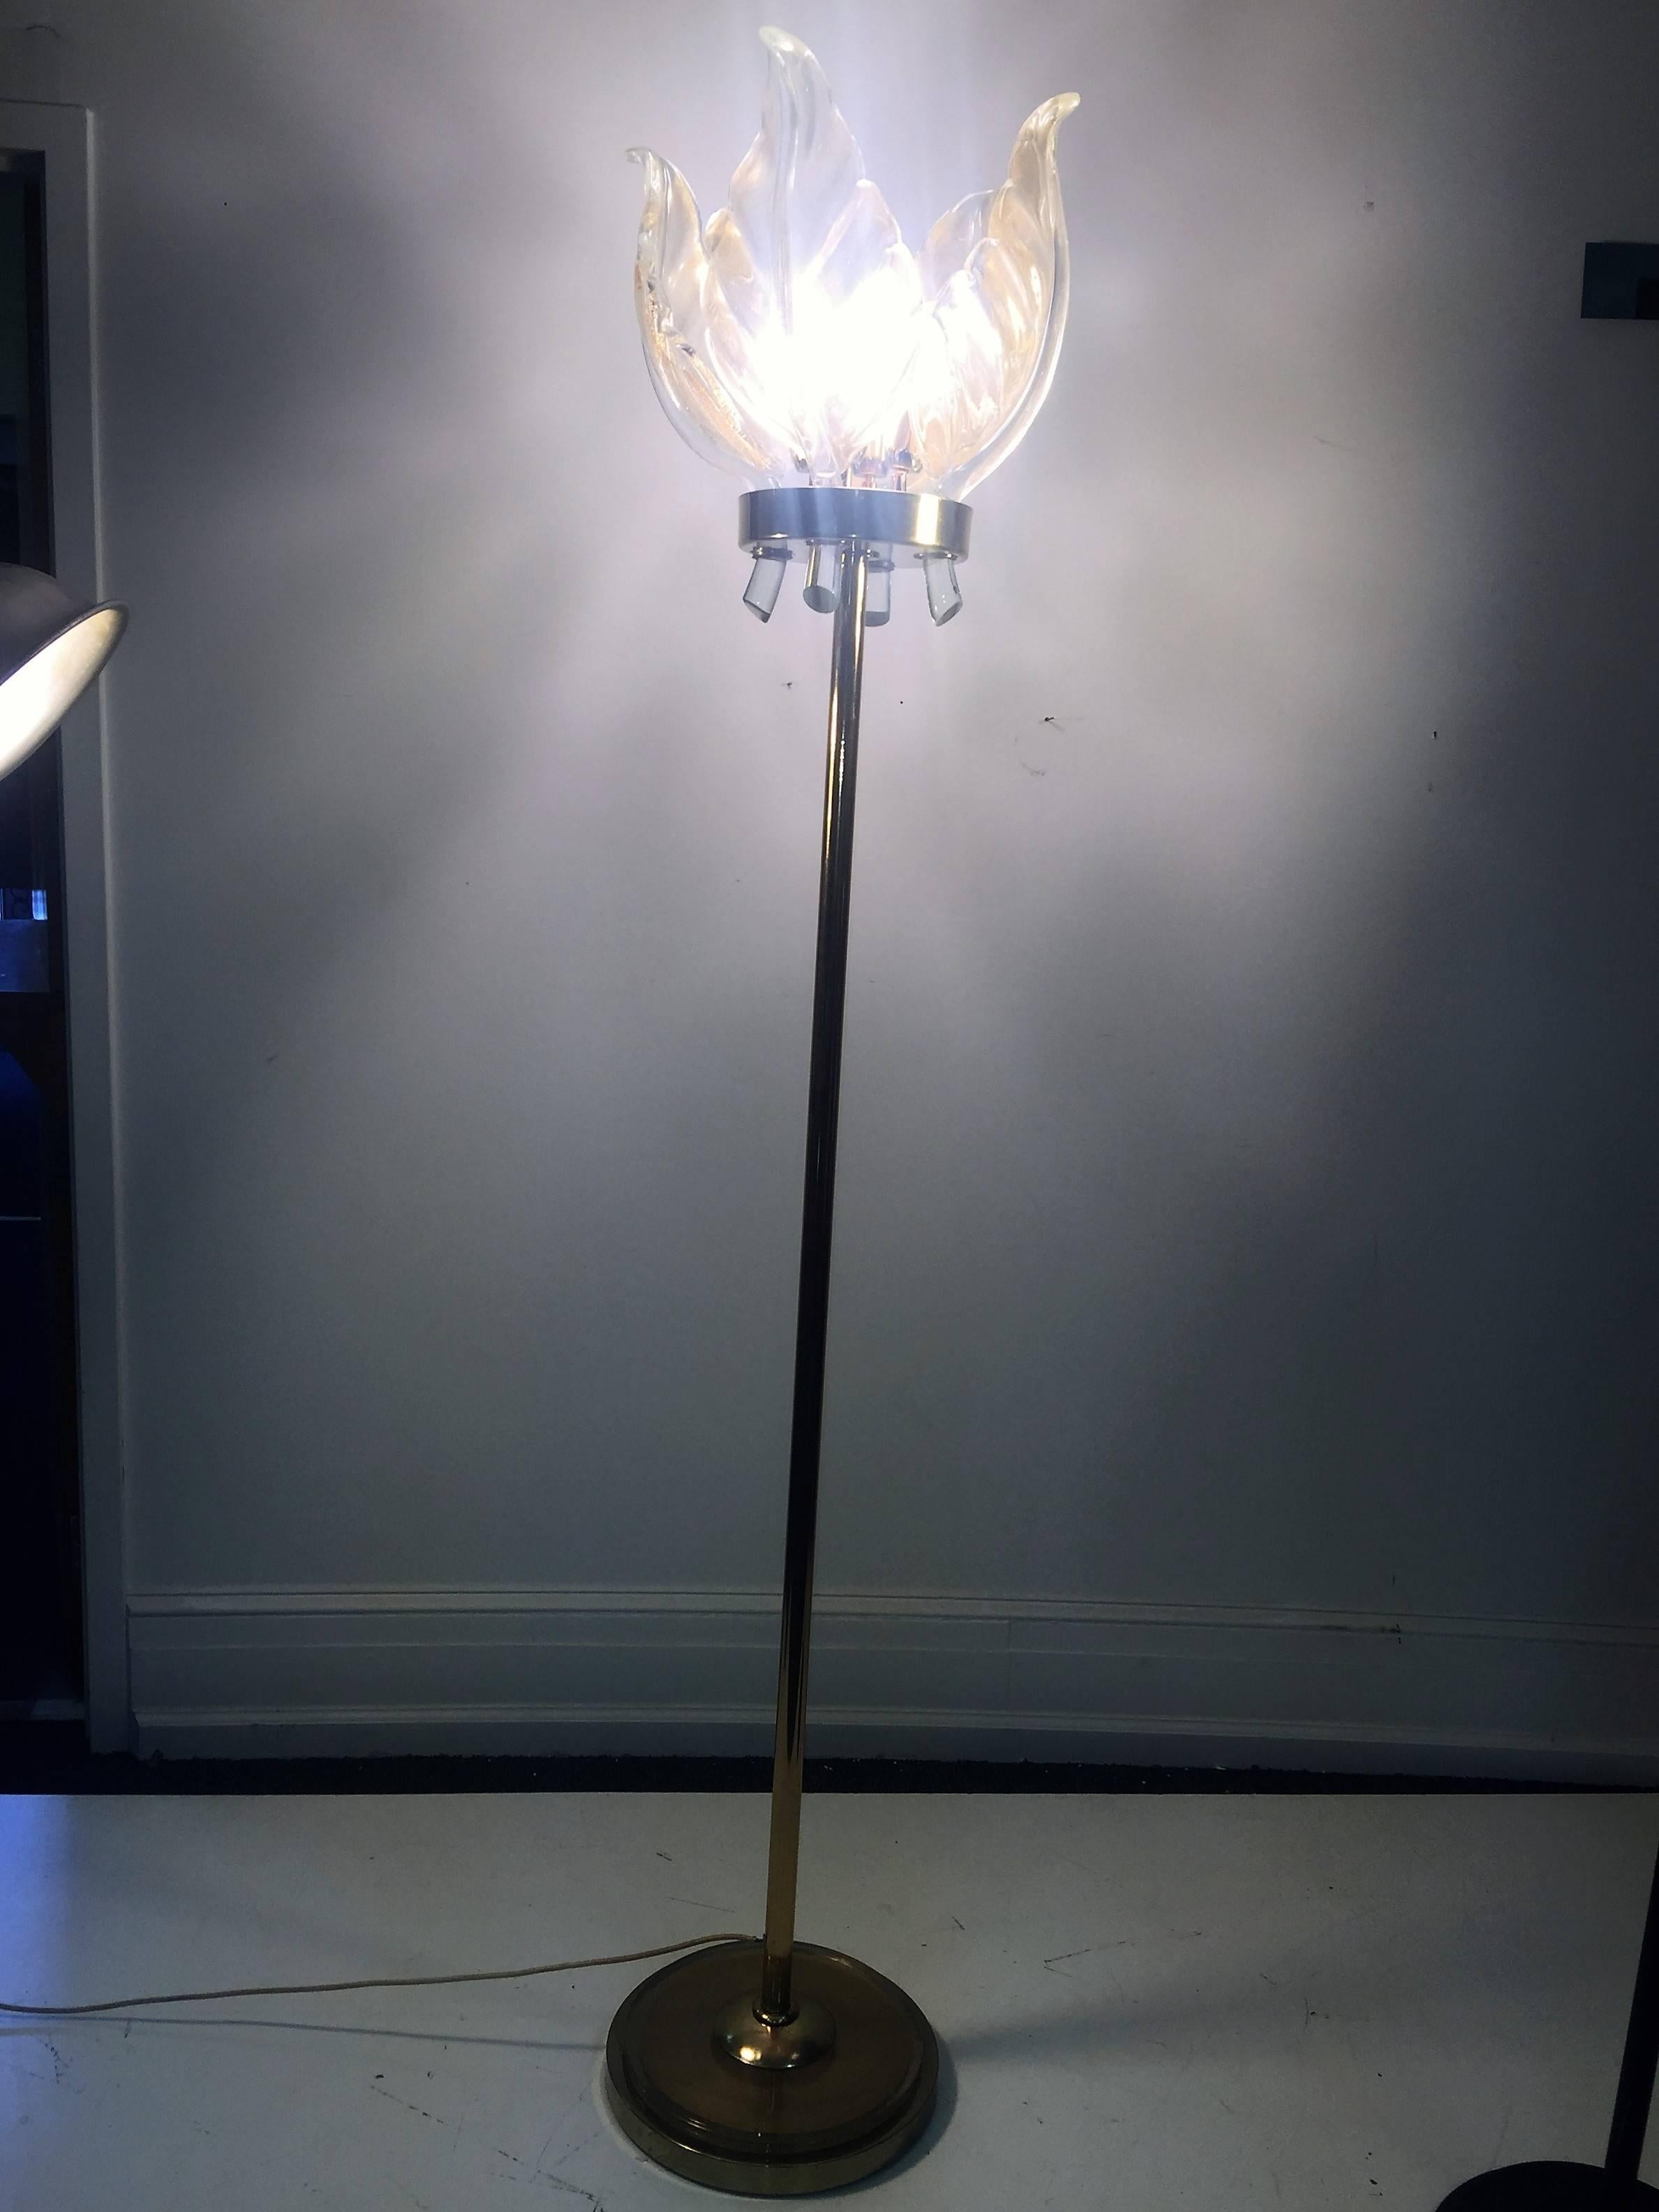 Rare design solid polished brass Murano glass floor lamp with round Murano glass base and four substantial handblown leaf form shades that slip into holders at the top of the lamp surrounding the light fixtures. Designed and created by Venini this